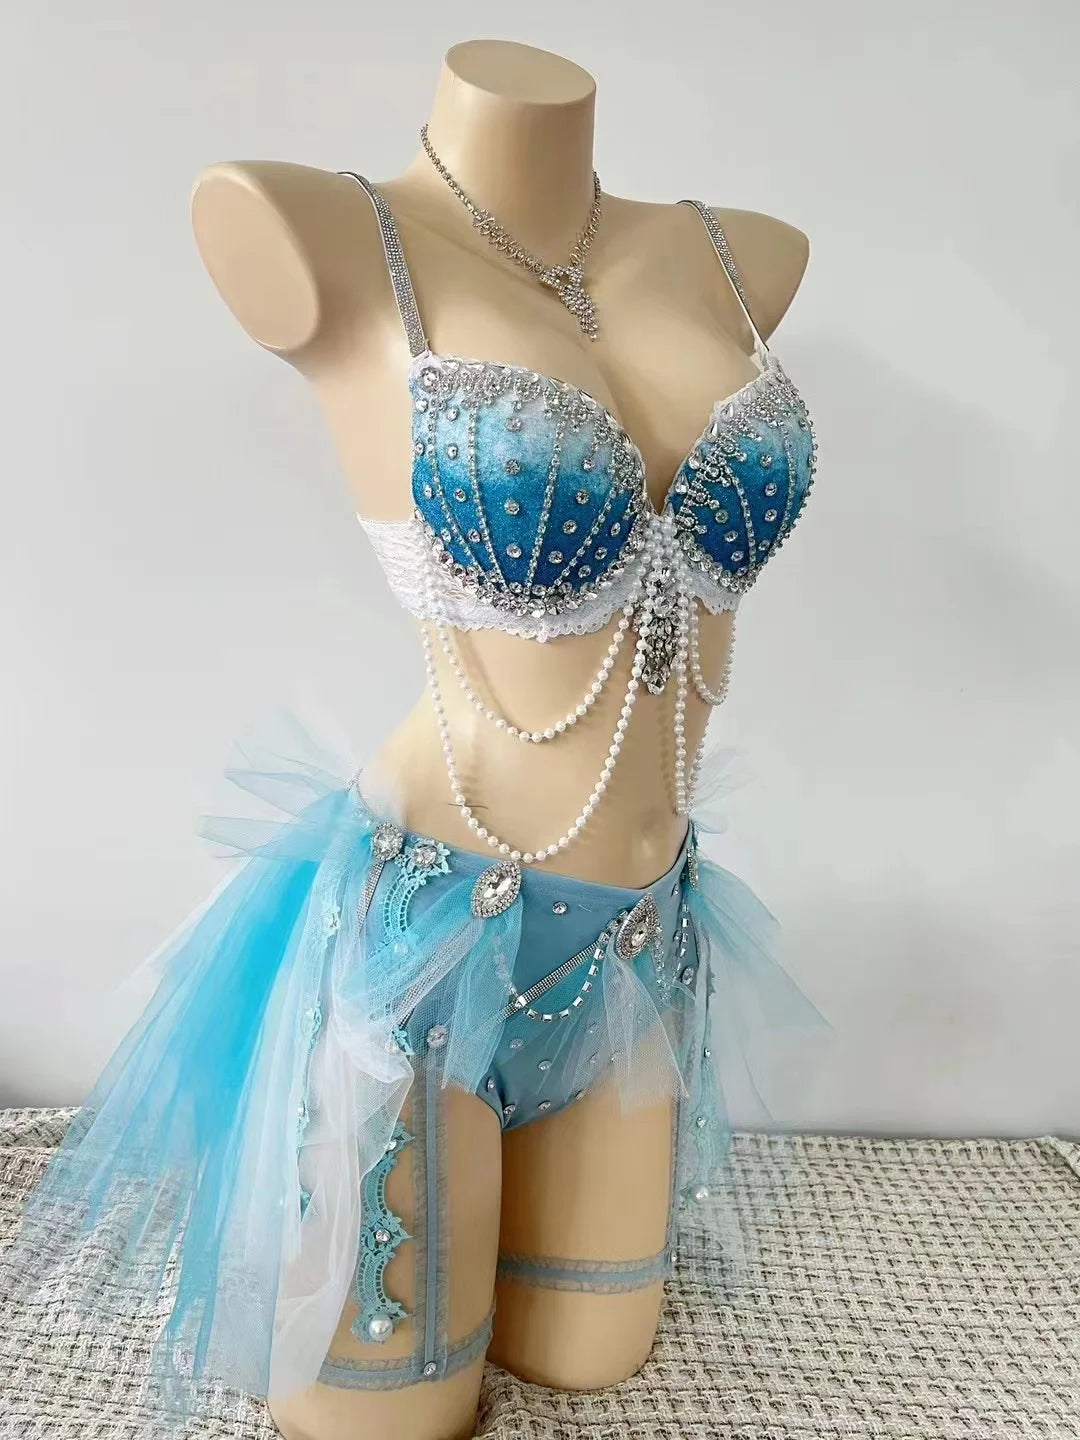 Sparkling Pearl Tassels Sexy Gathering Bikini Outfits Bar Nightclub Female Singer Dancer Stage Party Rave Music Festival Set